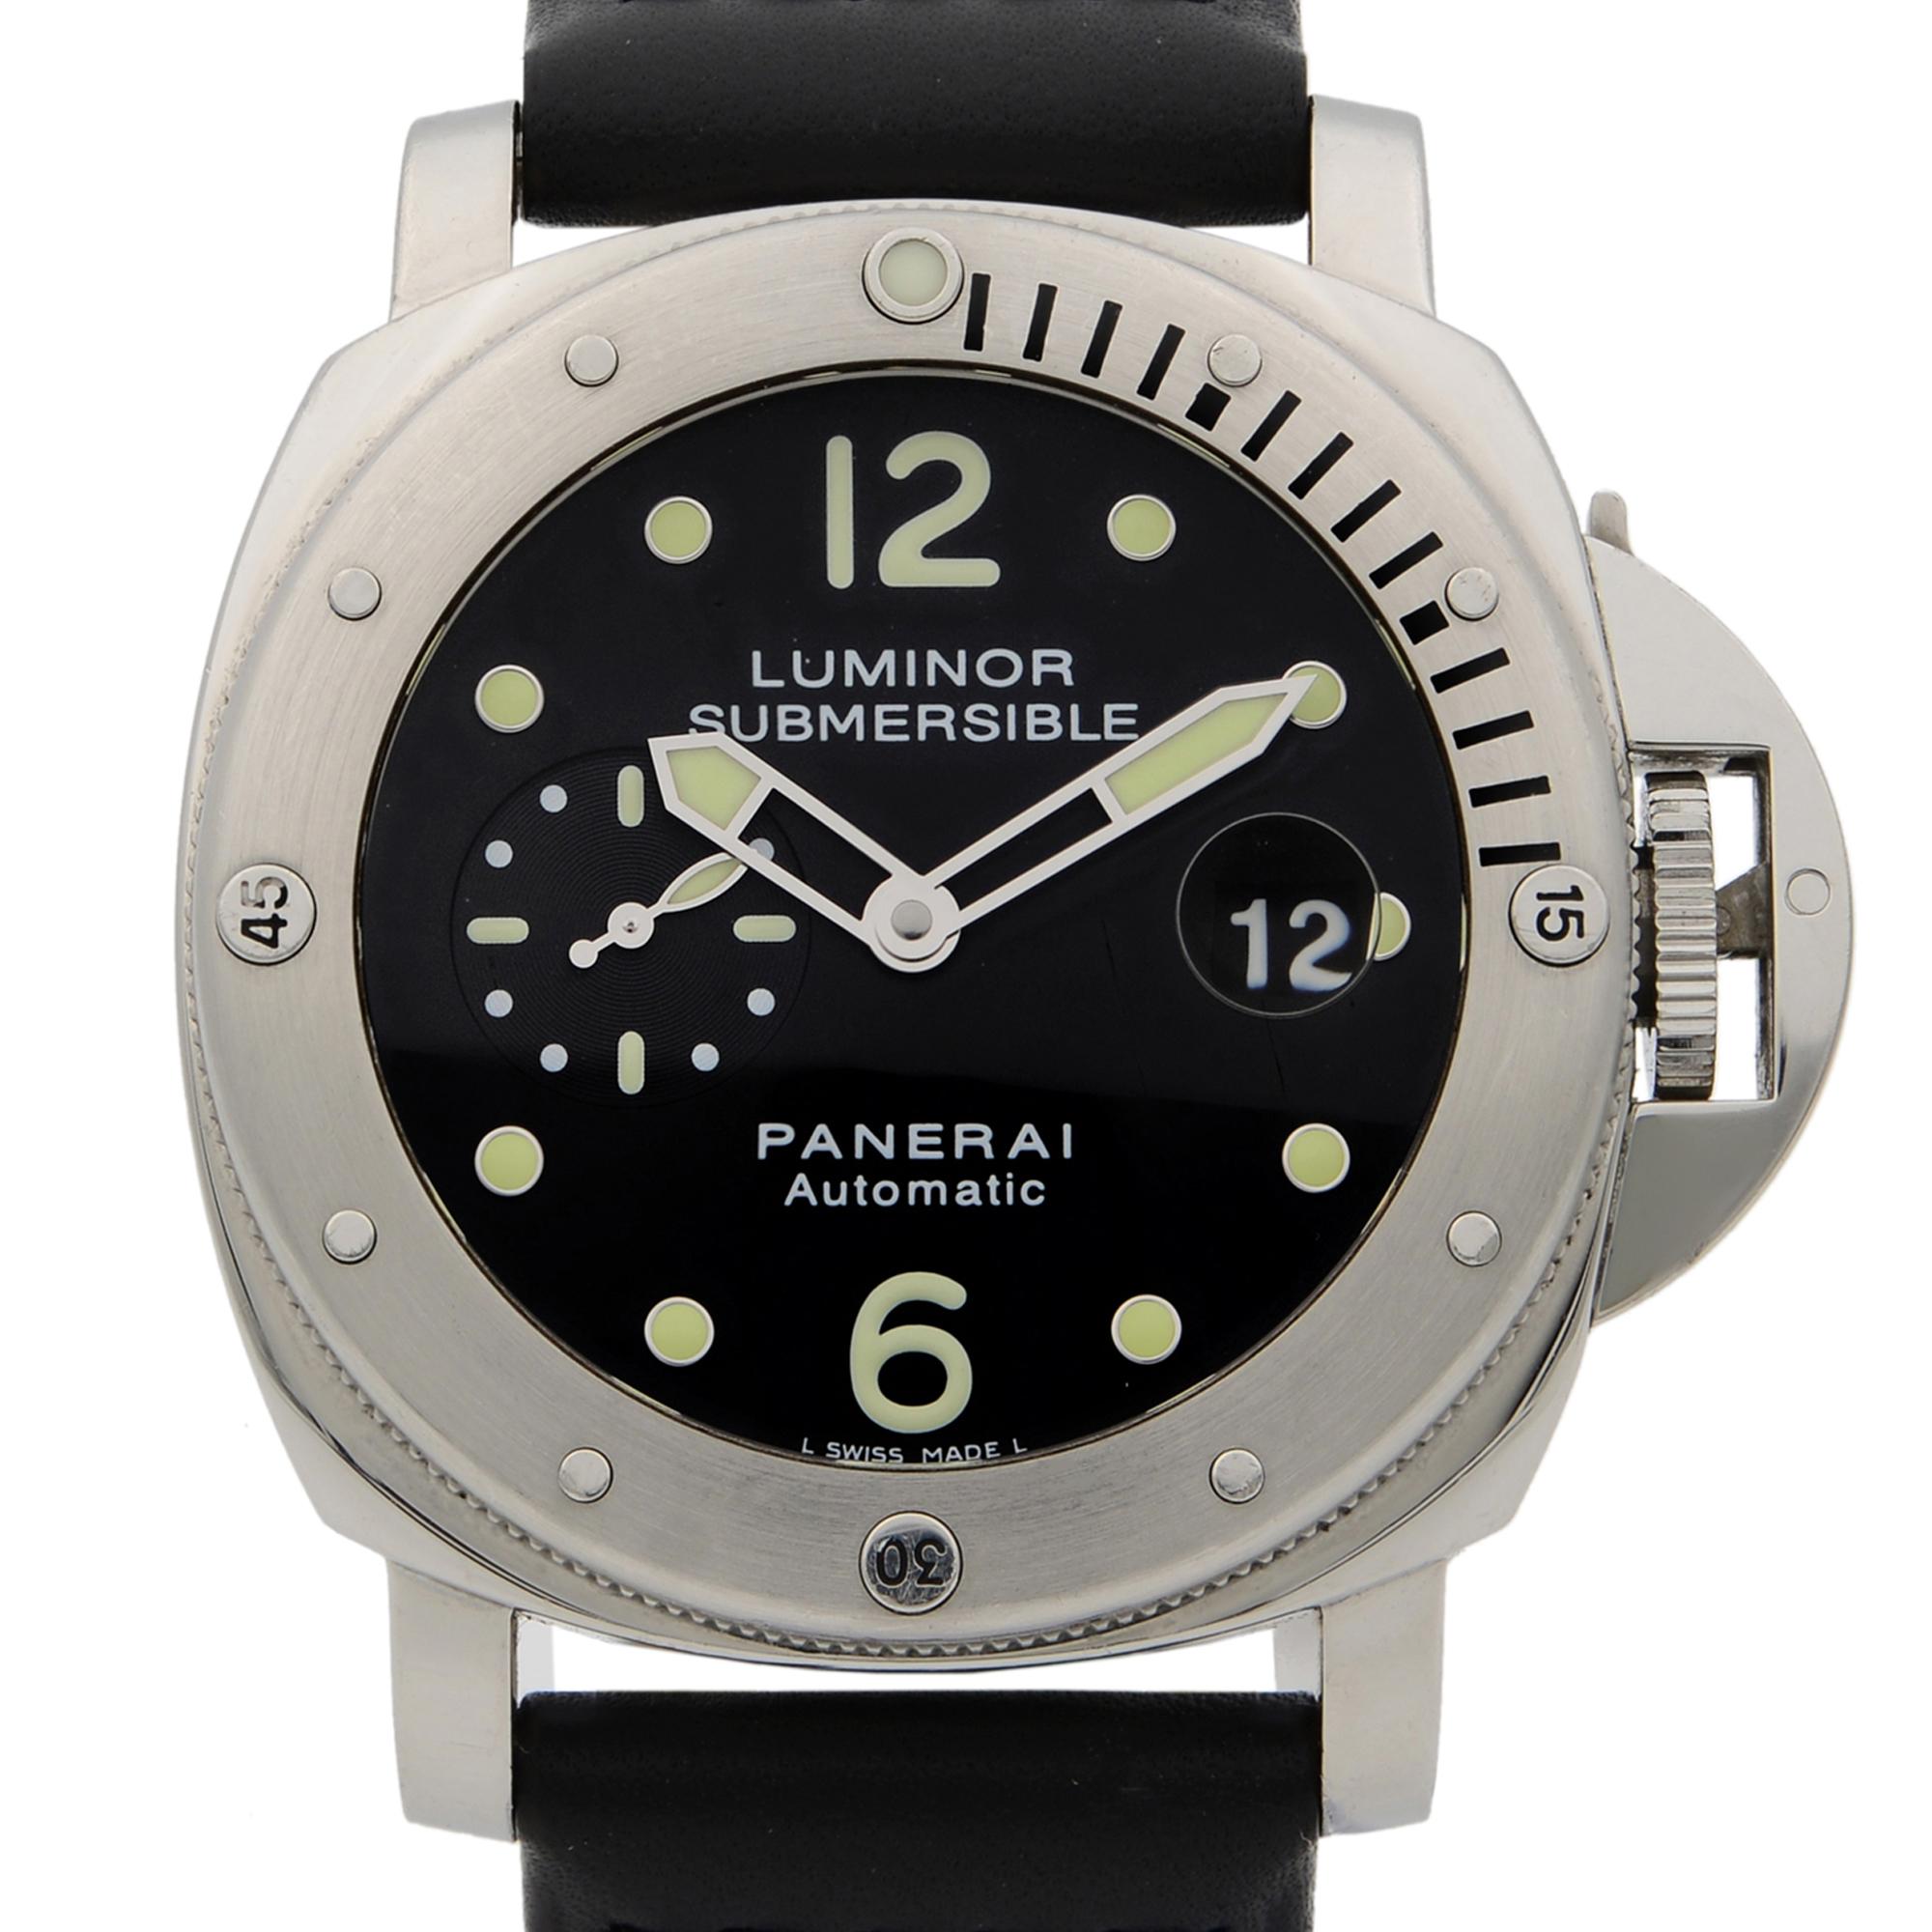 This pre-owned Panerai Luminor  PAM00024  is a beautiful men's timepiece that is powered by mechanical (automatic) movement which is cased in a stainless steel case. It has a round shape face, date indicator, small seconds subdial dial and has hand